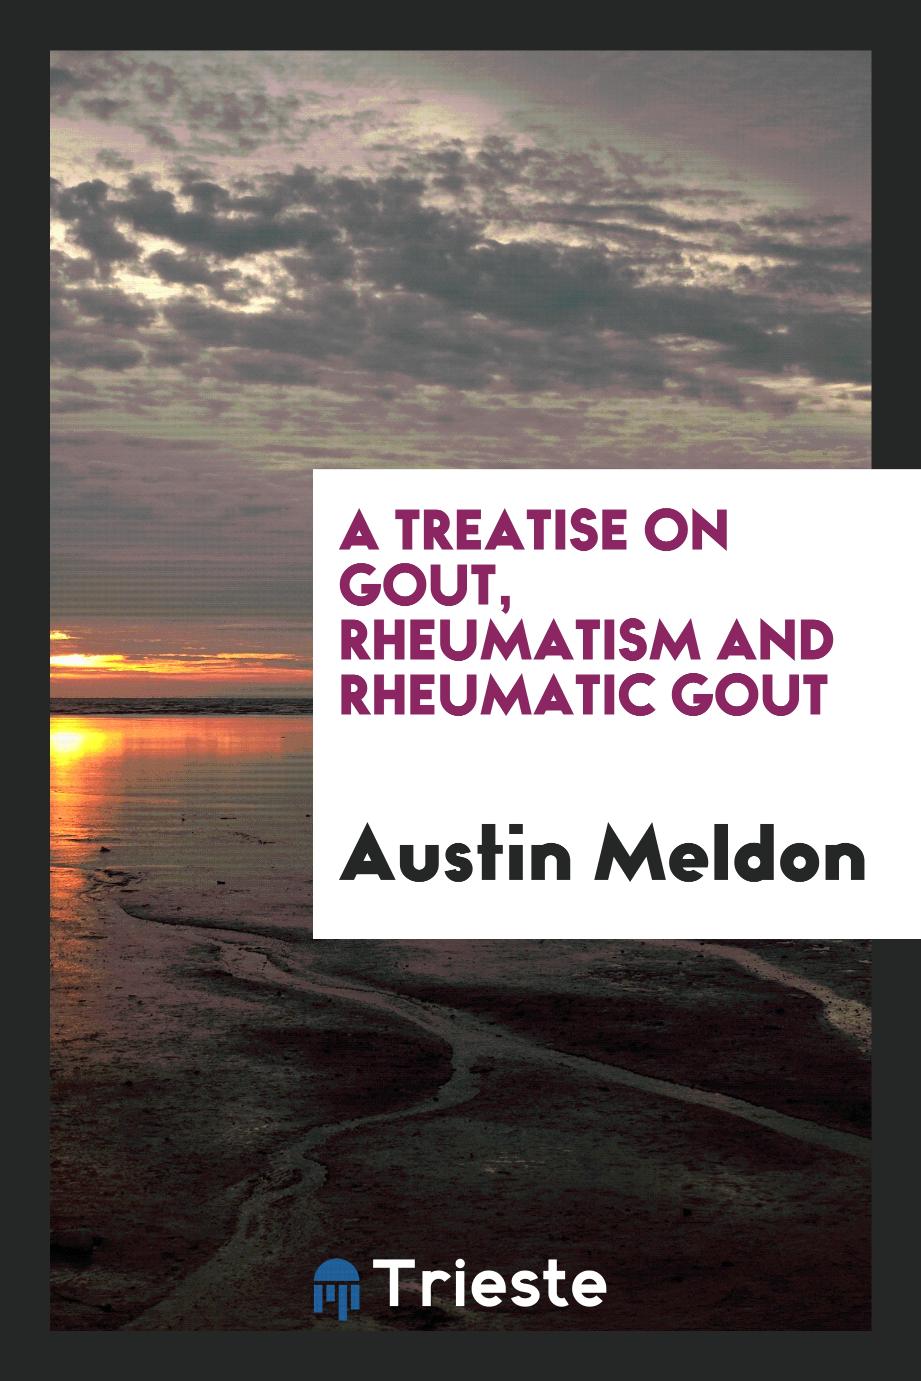 A Treatise on Gout, Rheumatism and Rheumatic Gout